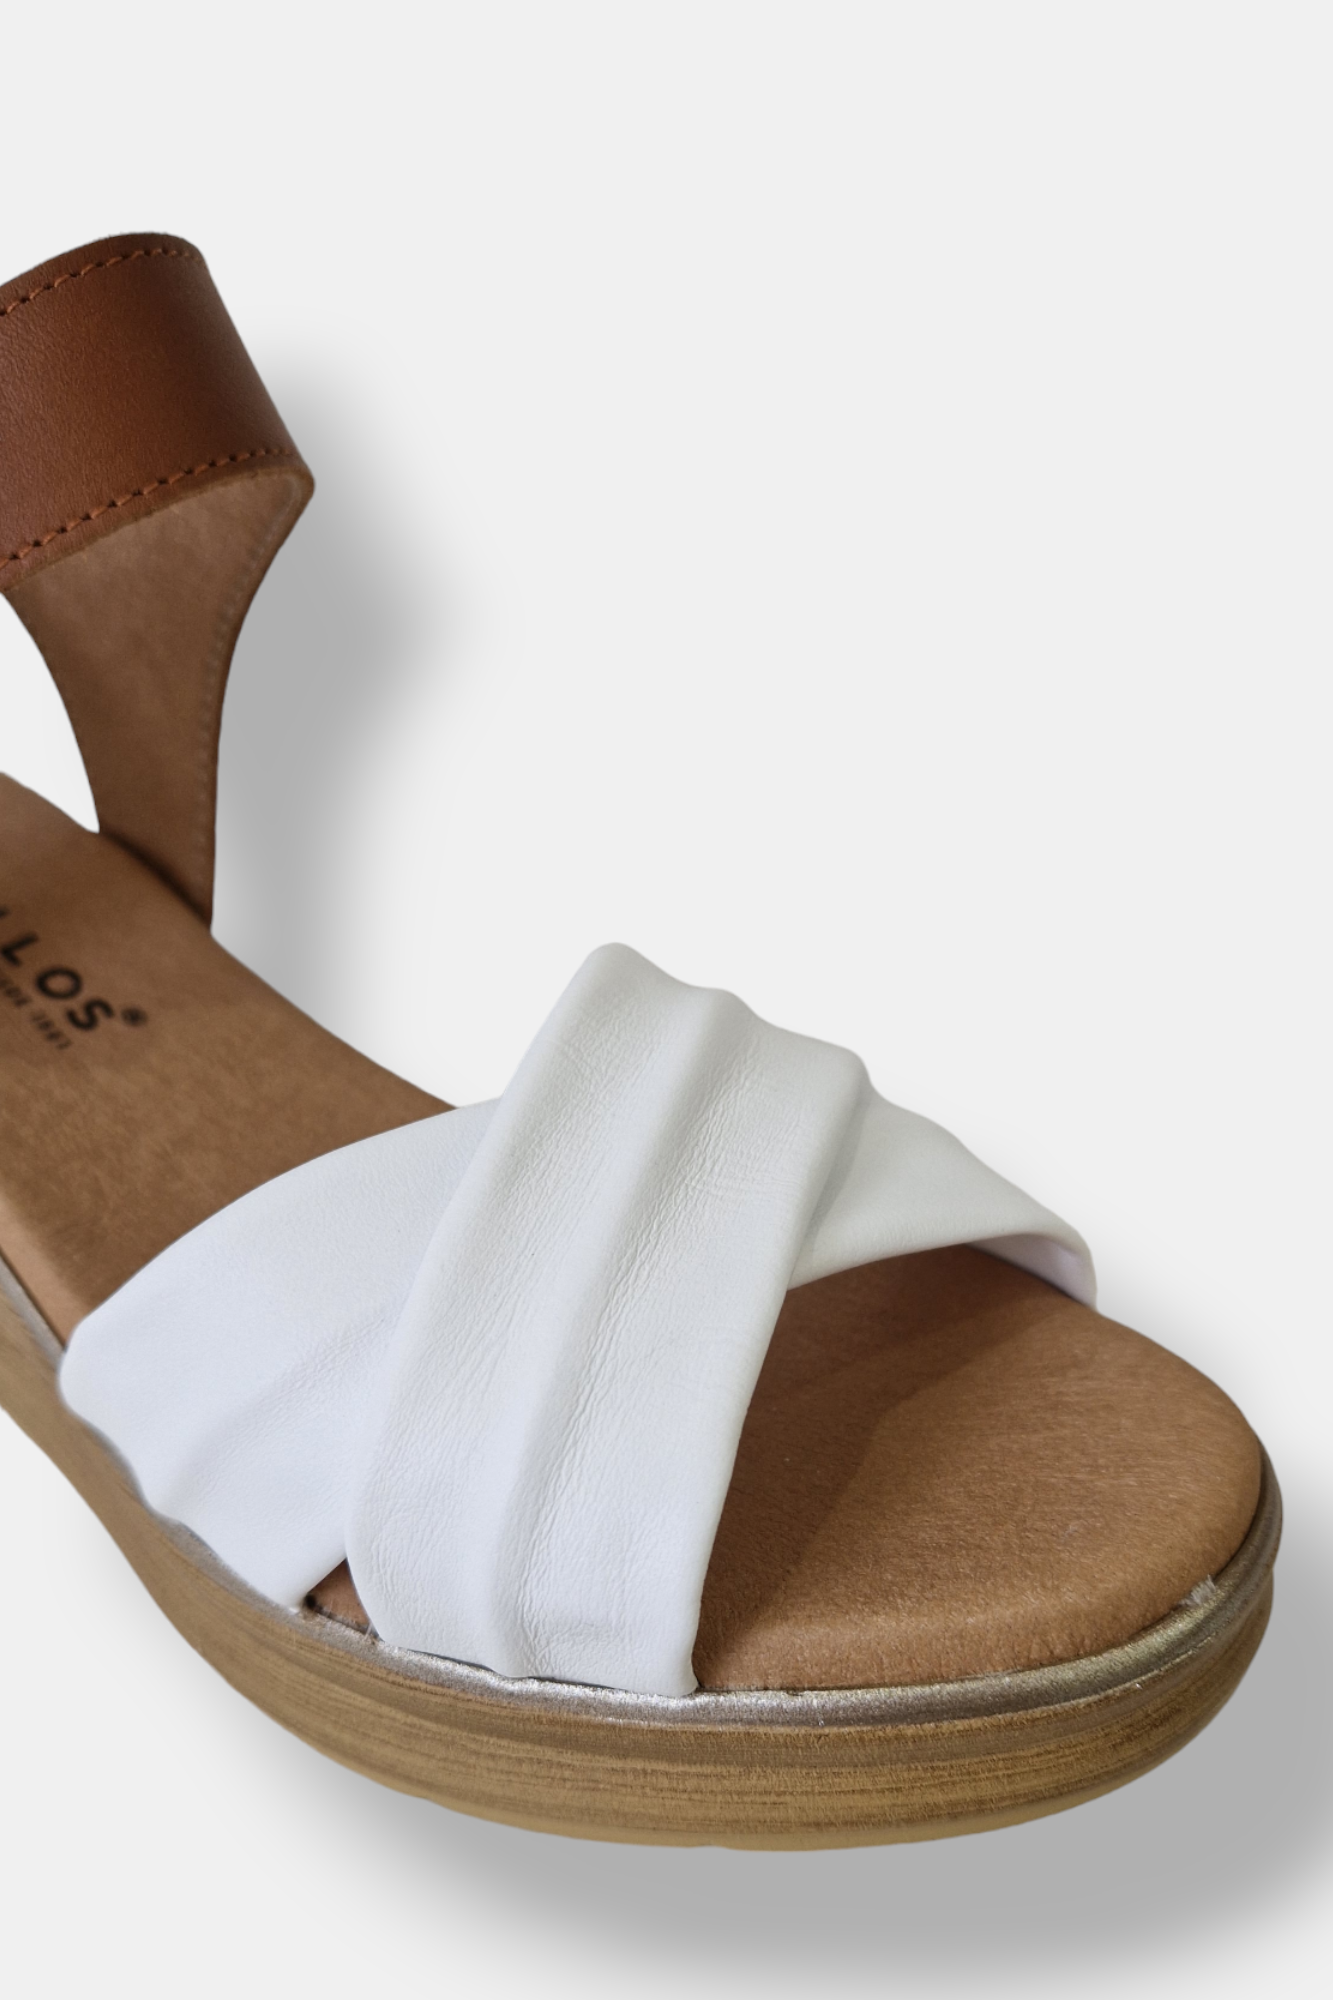 PITILLOS 5610 WHITE/TAN LEATHER WEDGES